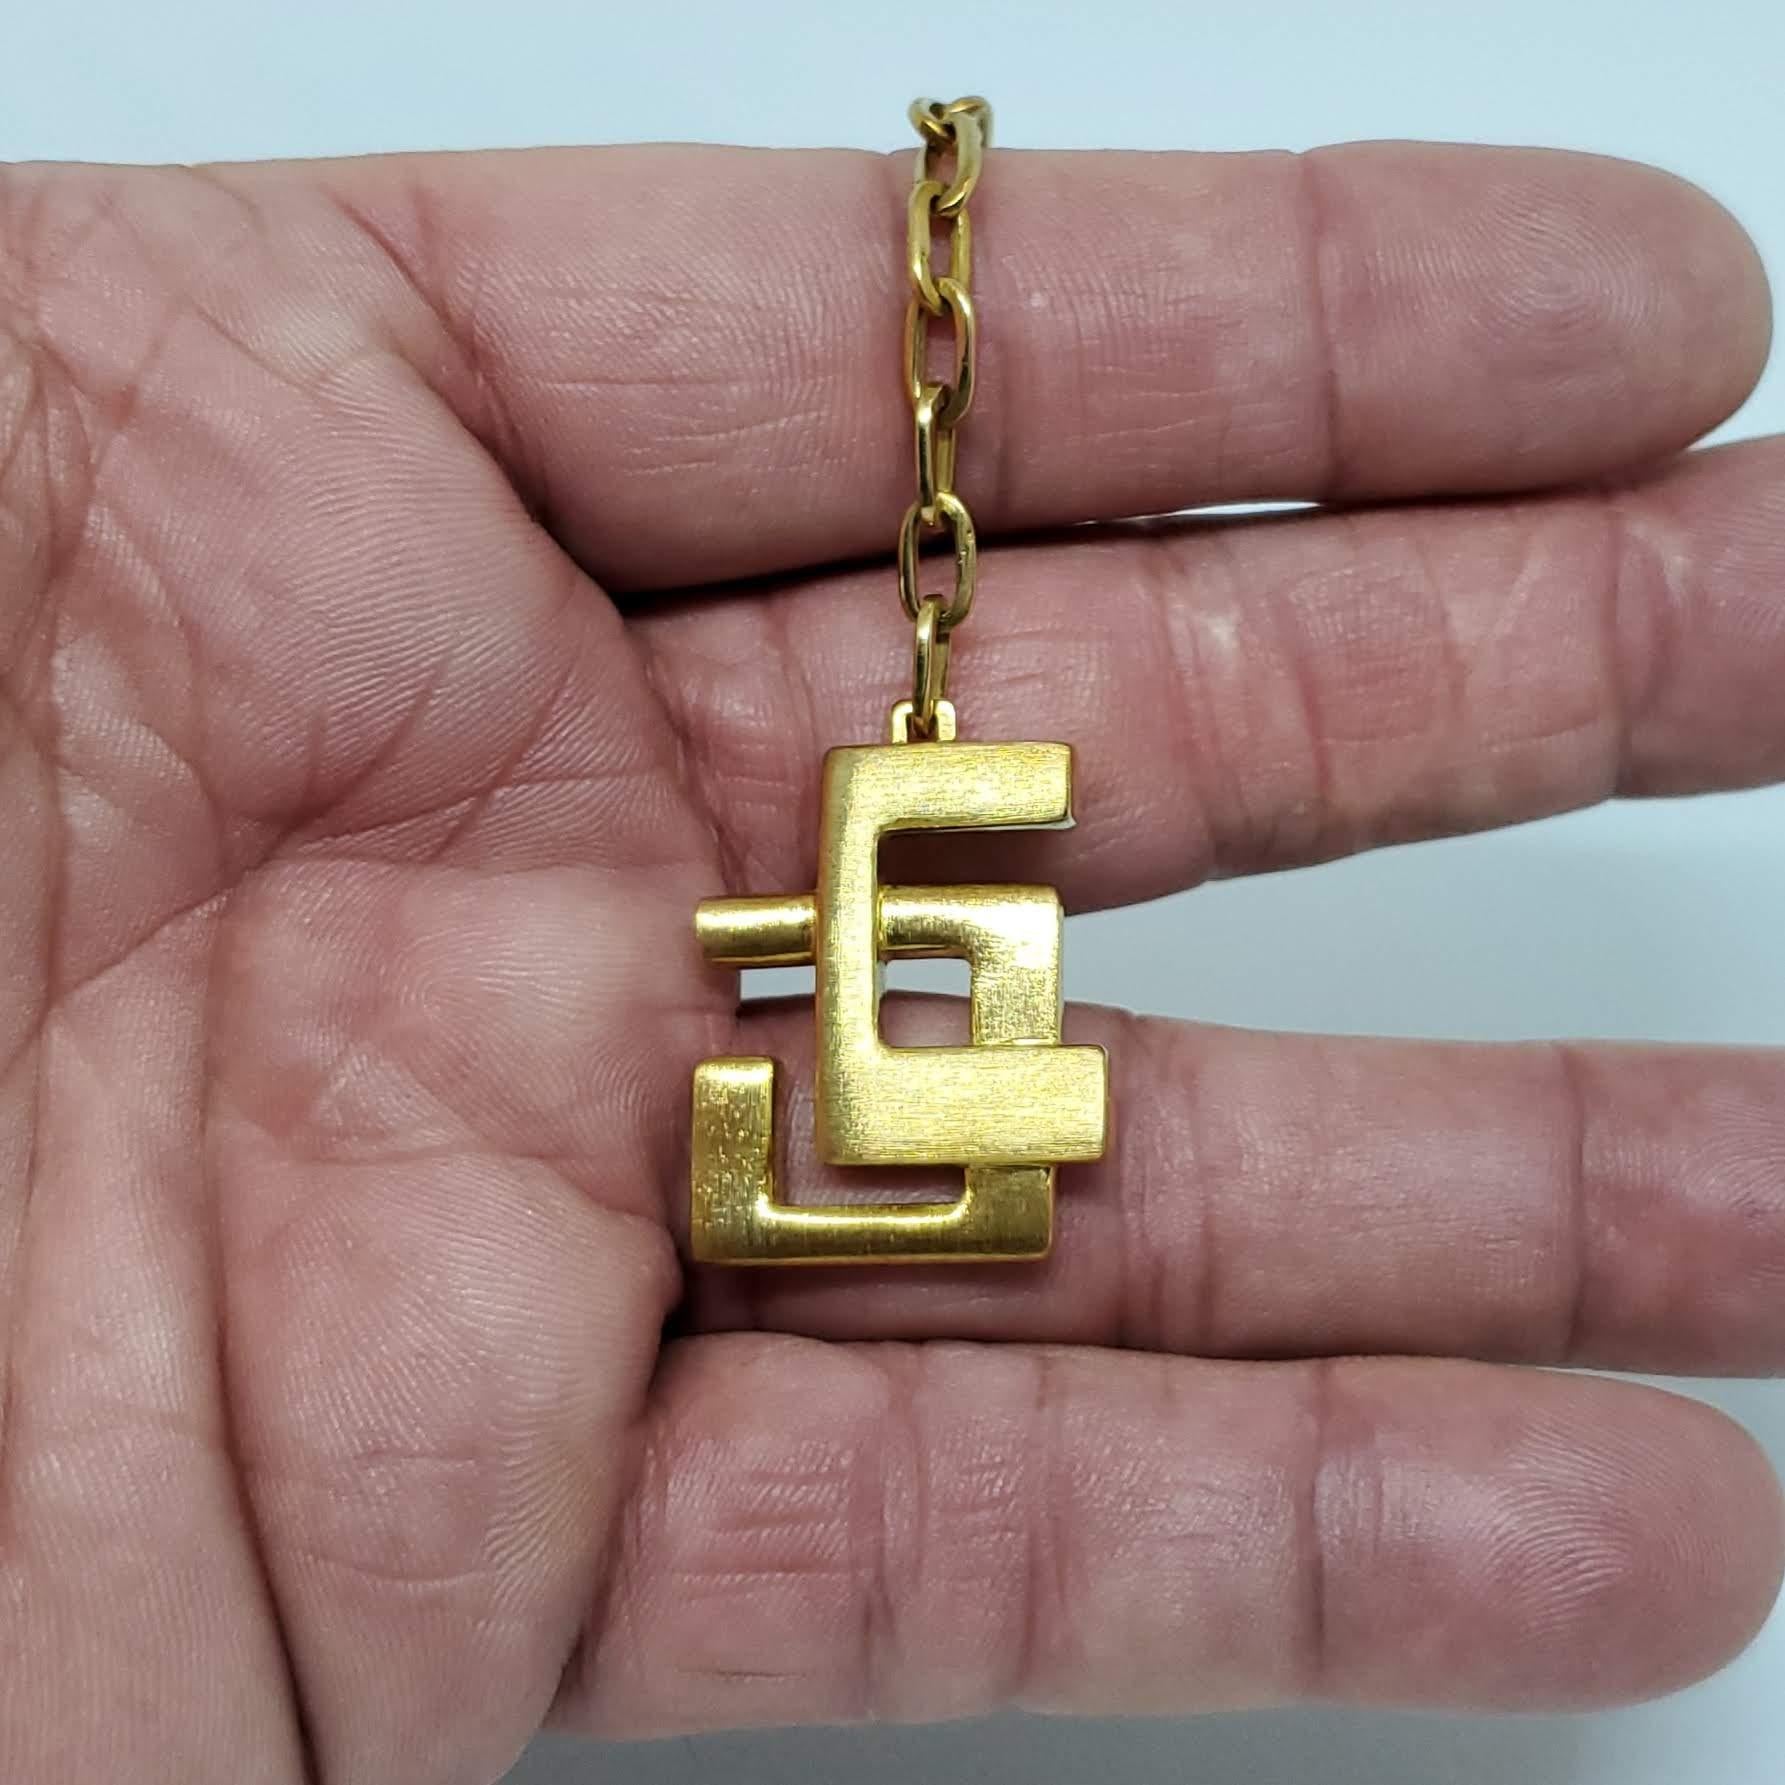 Here's a Burle Marx piece you'll likely never see again. Haroldo made this for me for my 18th Birthday. I put a key on it maybe twice. It's too beautiful to use! It's total length is just a tad over 4.5 inches. The medallion is 1.13 inches long, and